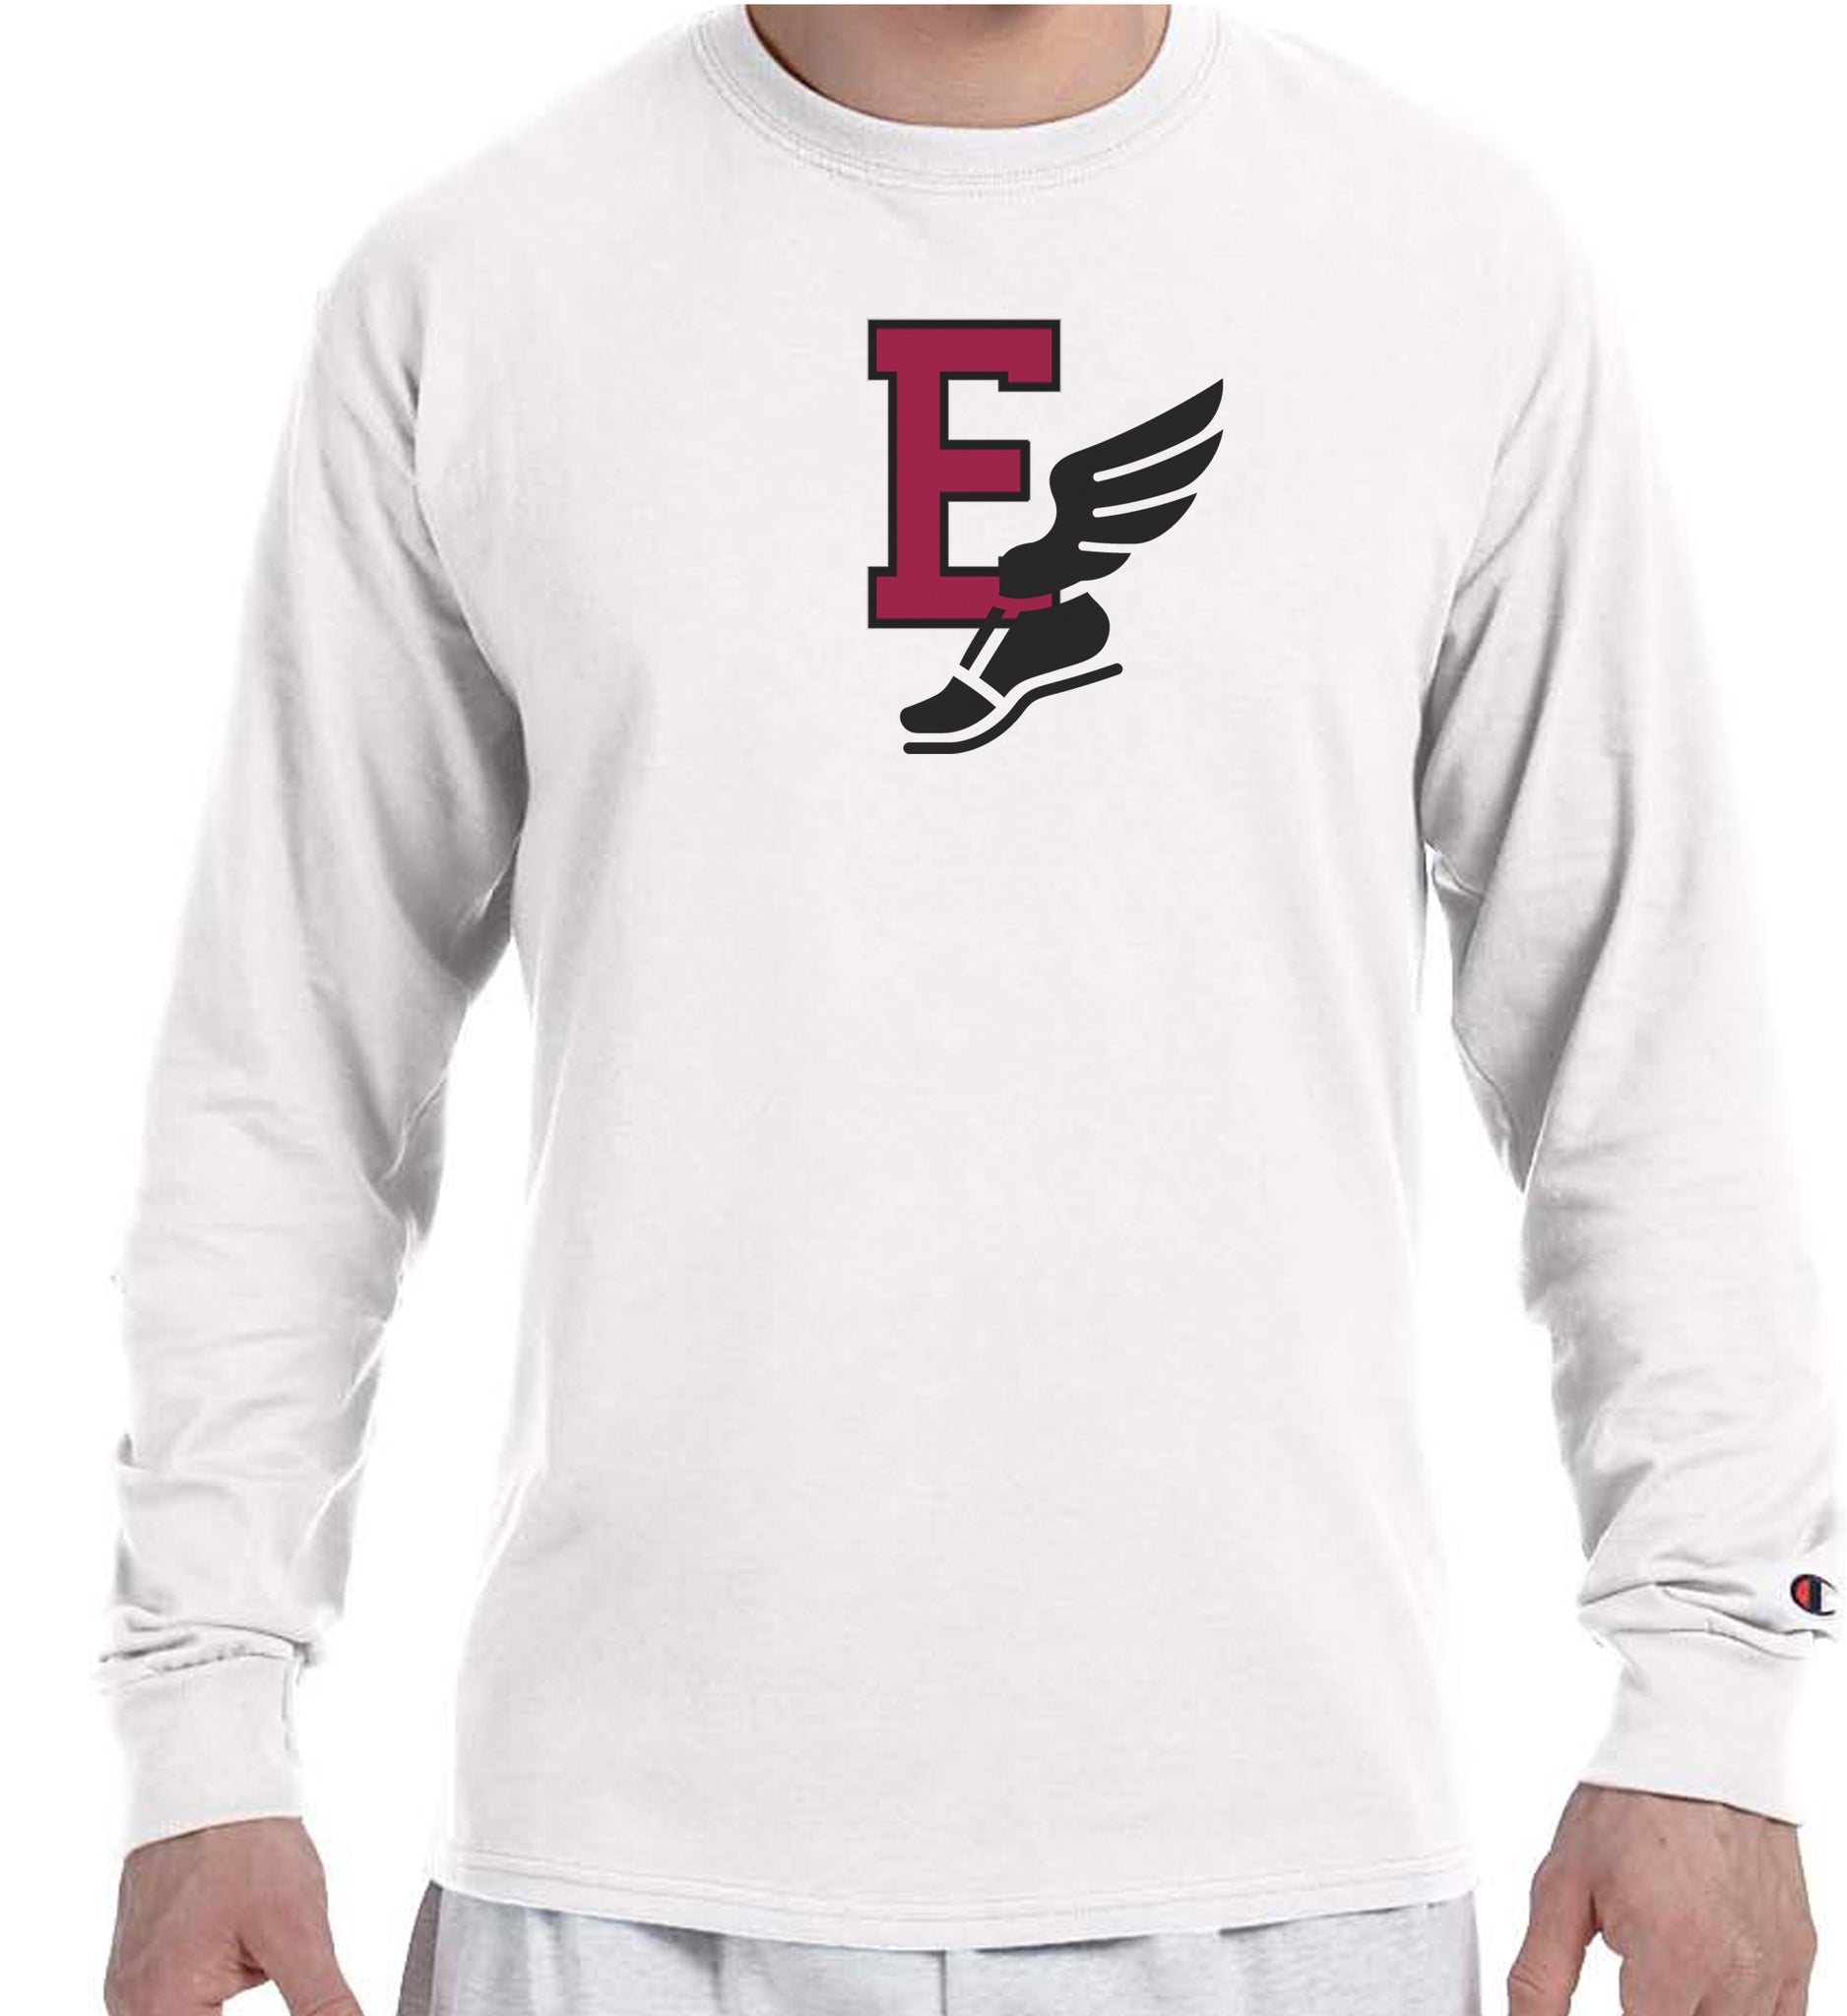 E WITH TRACK SHOE Champion Brand Long Sleeve White